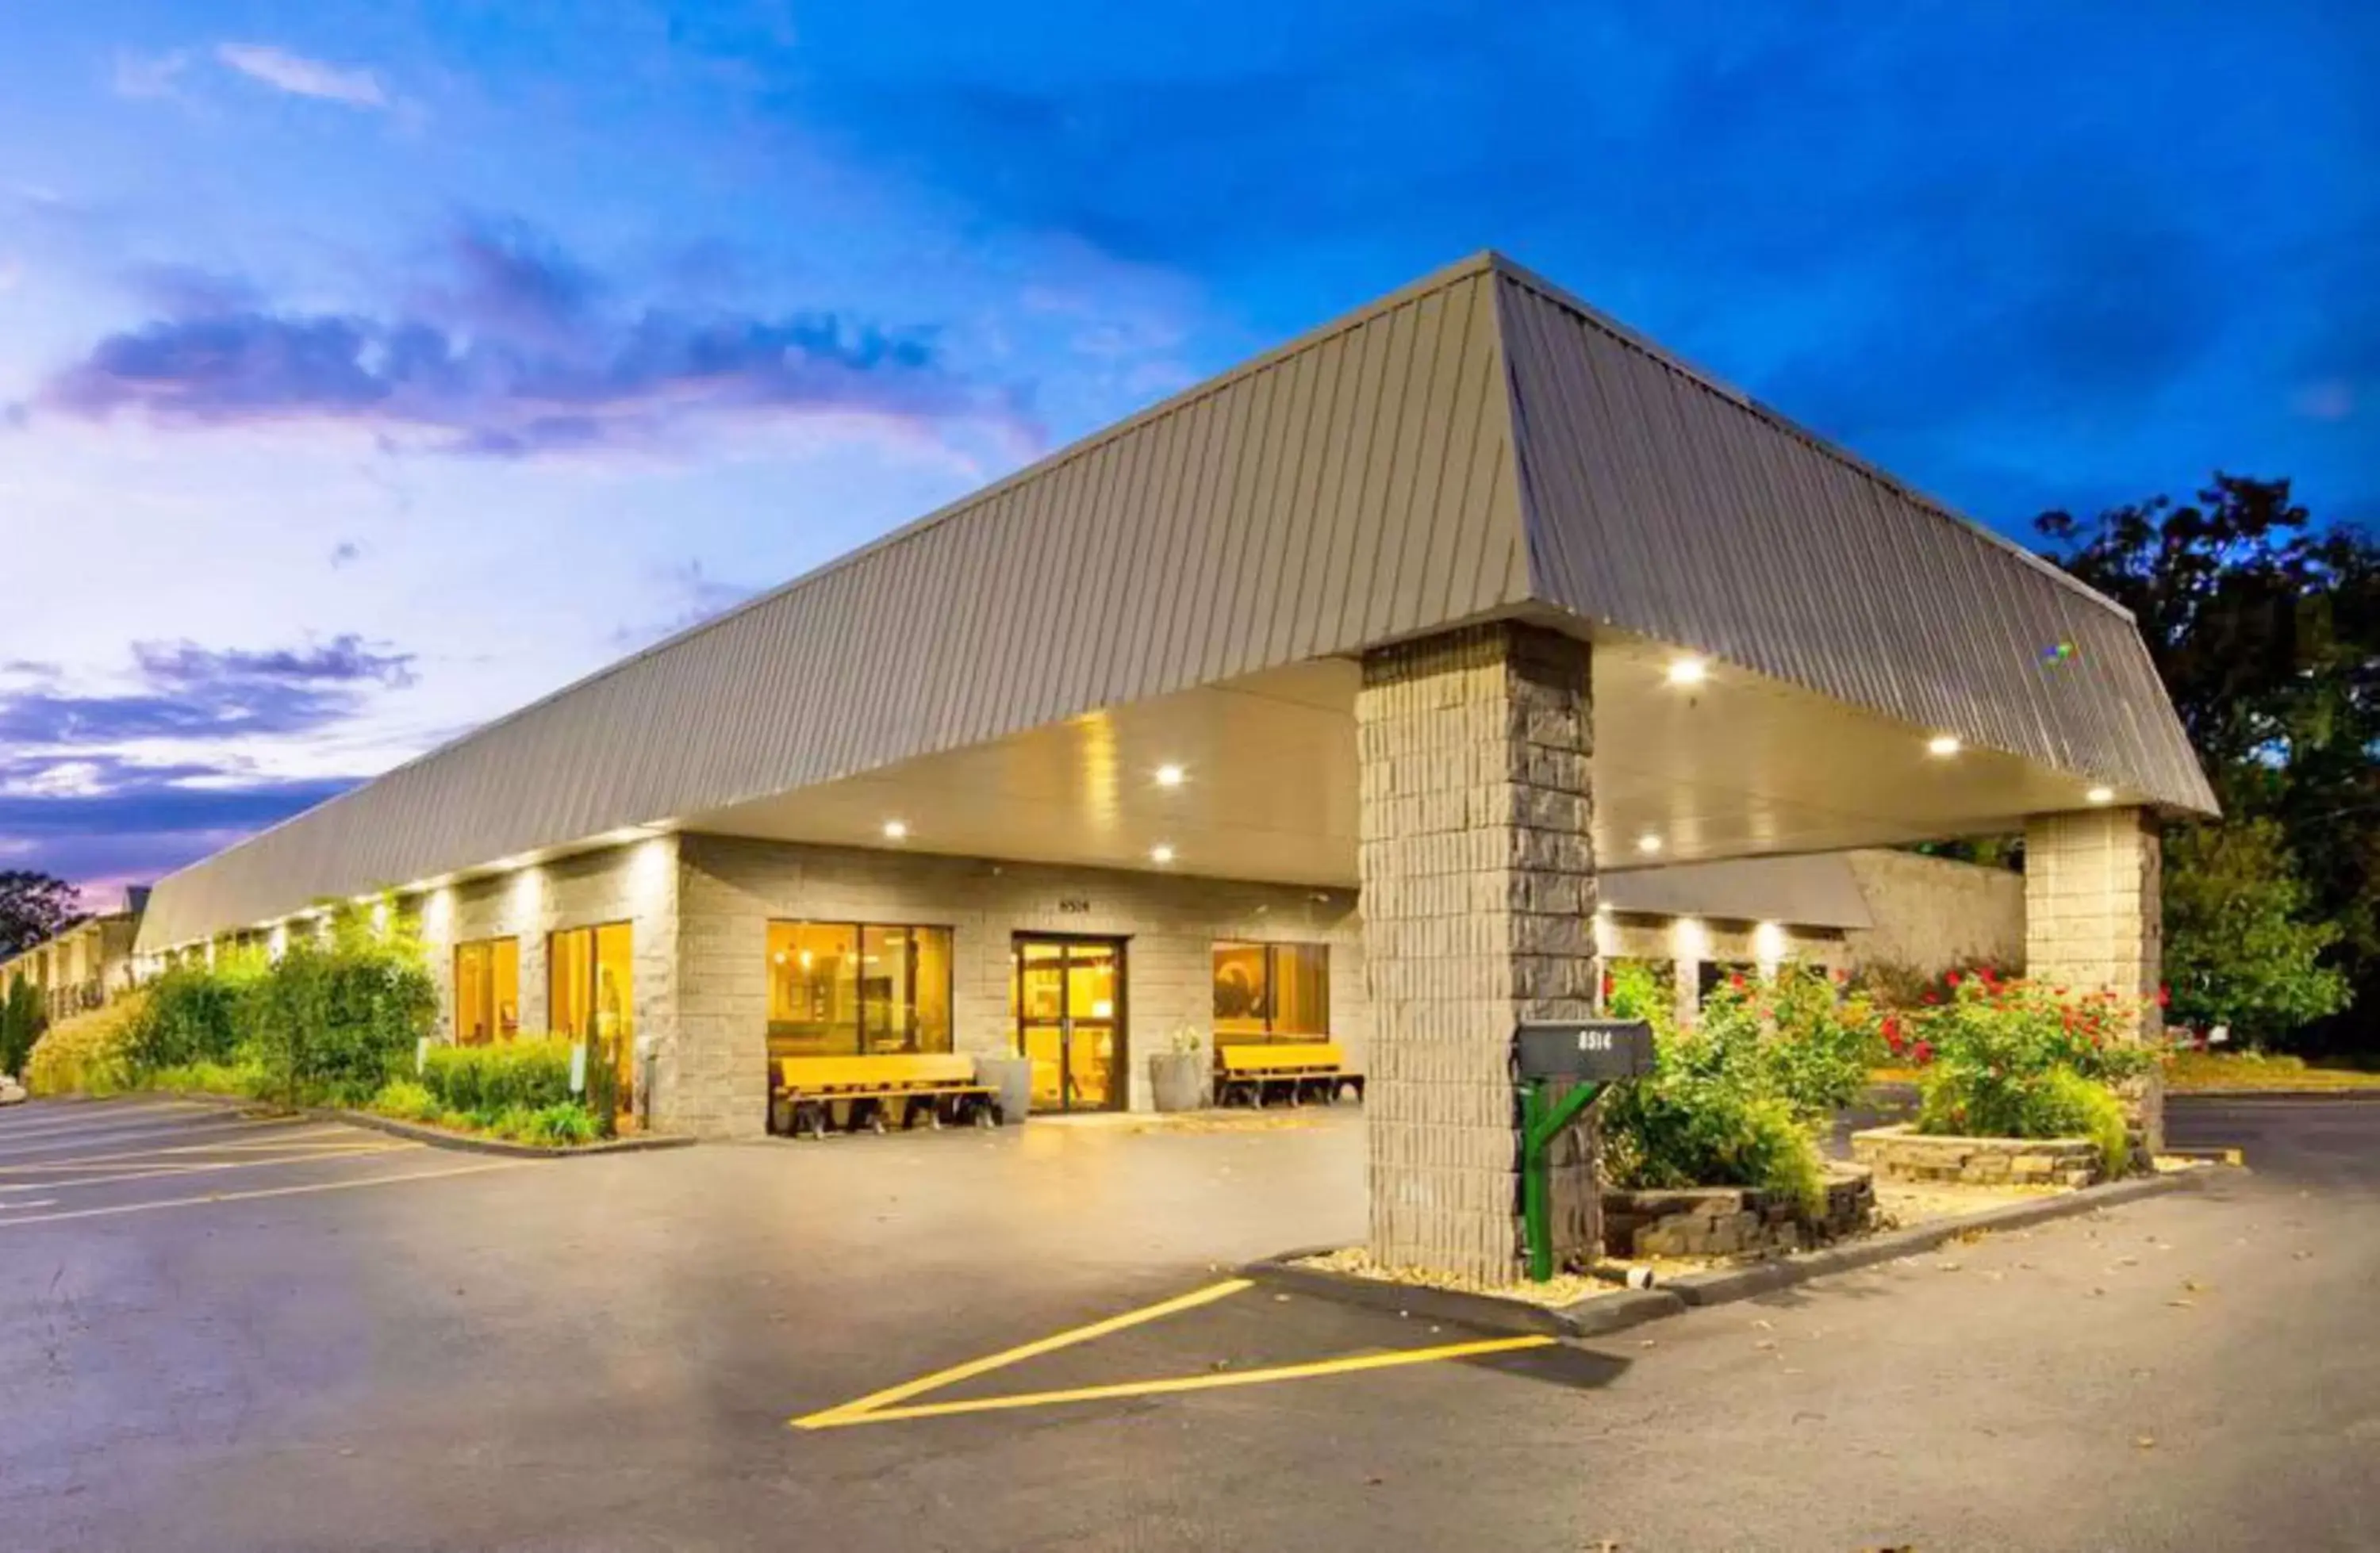 Property Building in Best Western Branson Inn and Conference Center